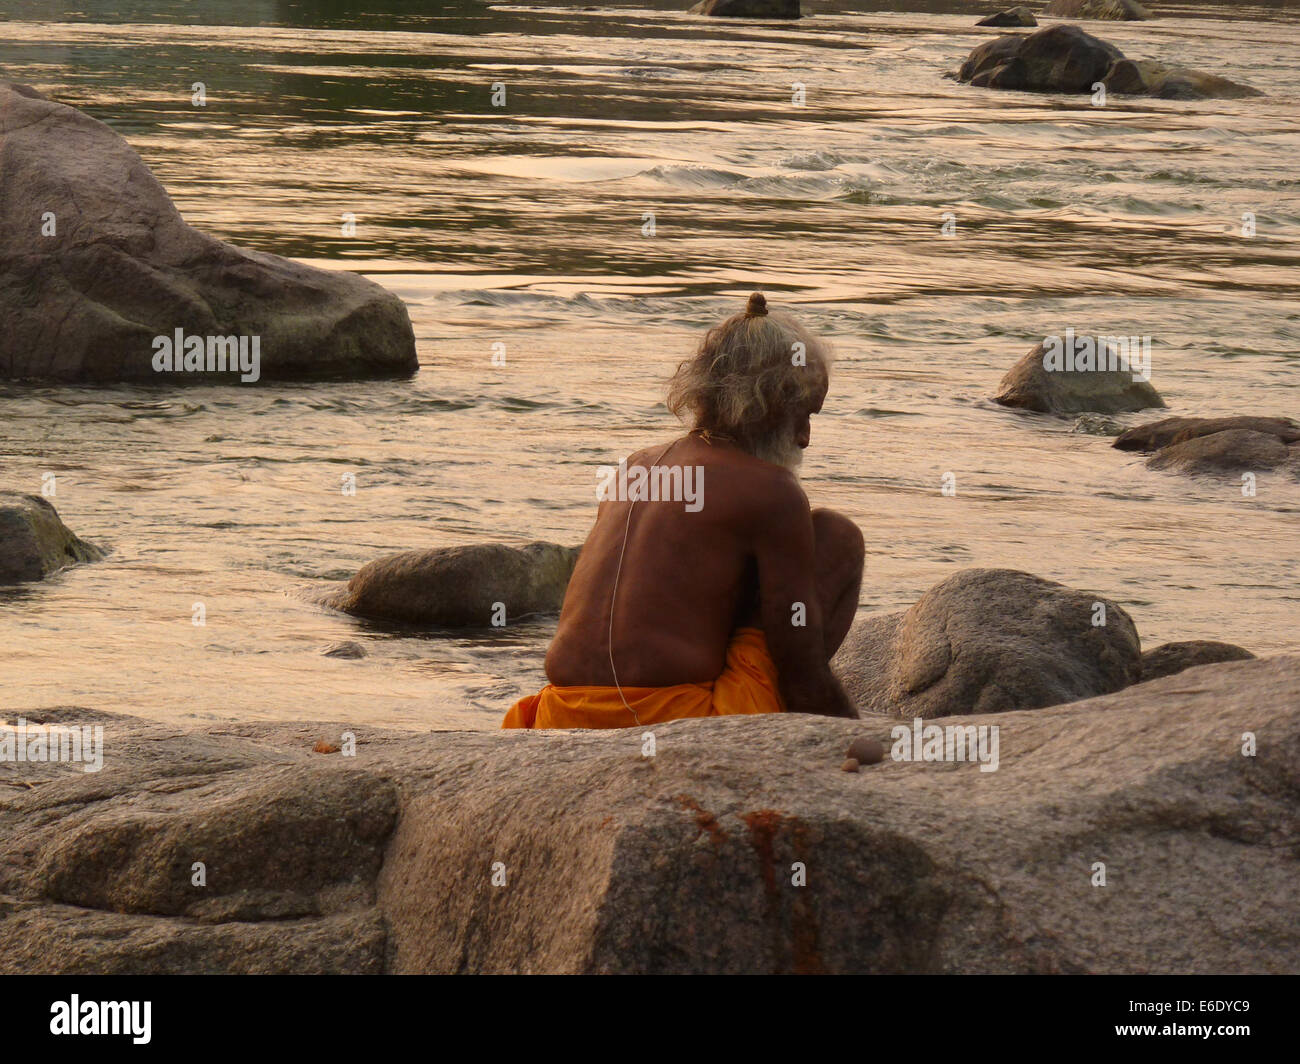 Saddhu in the river between rocks on the bank of the Betwa River in Orchha, Madhya Pradesh, Bundelkhand region, India, Asia Stock Photo